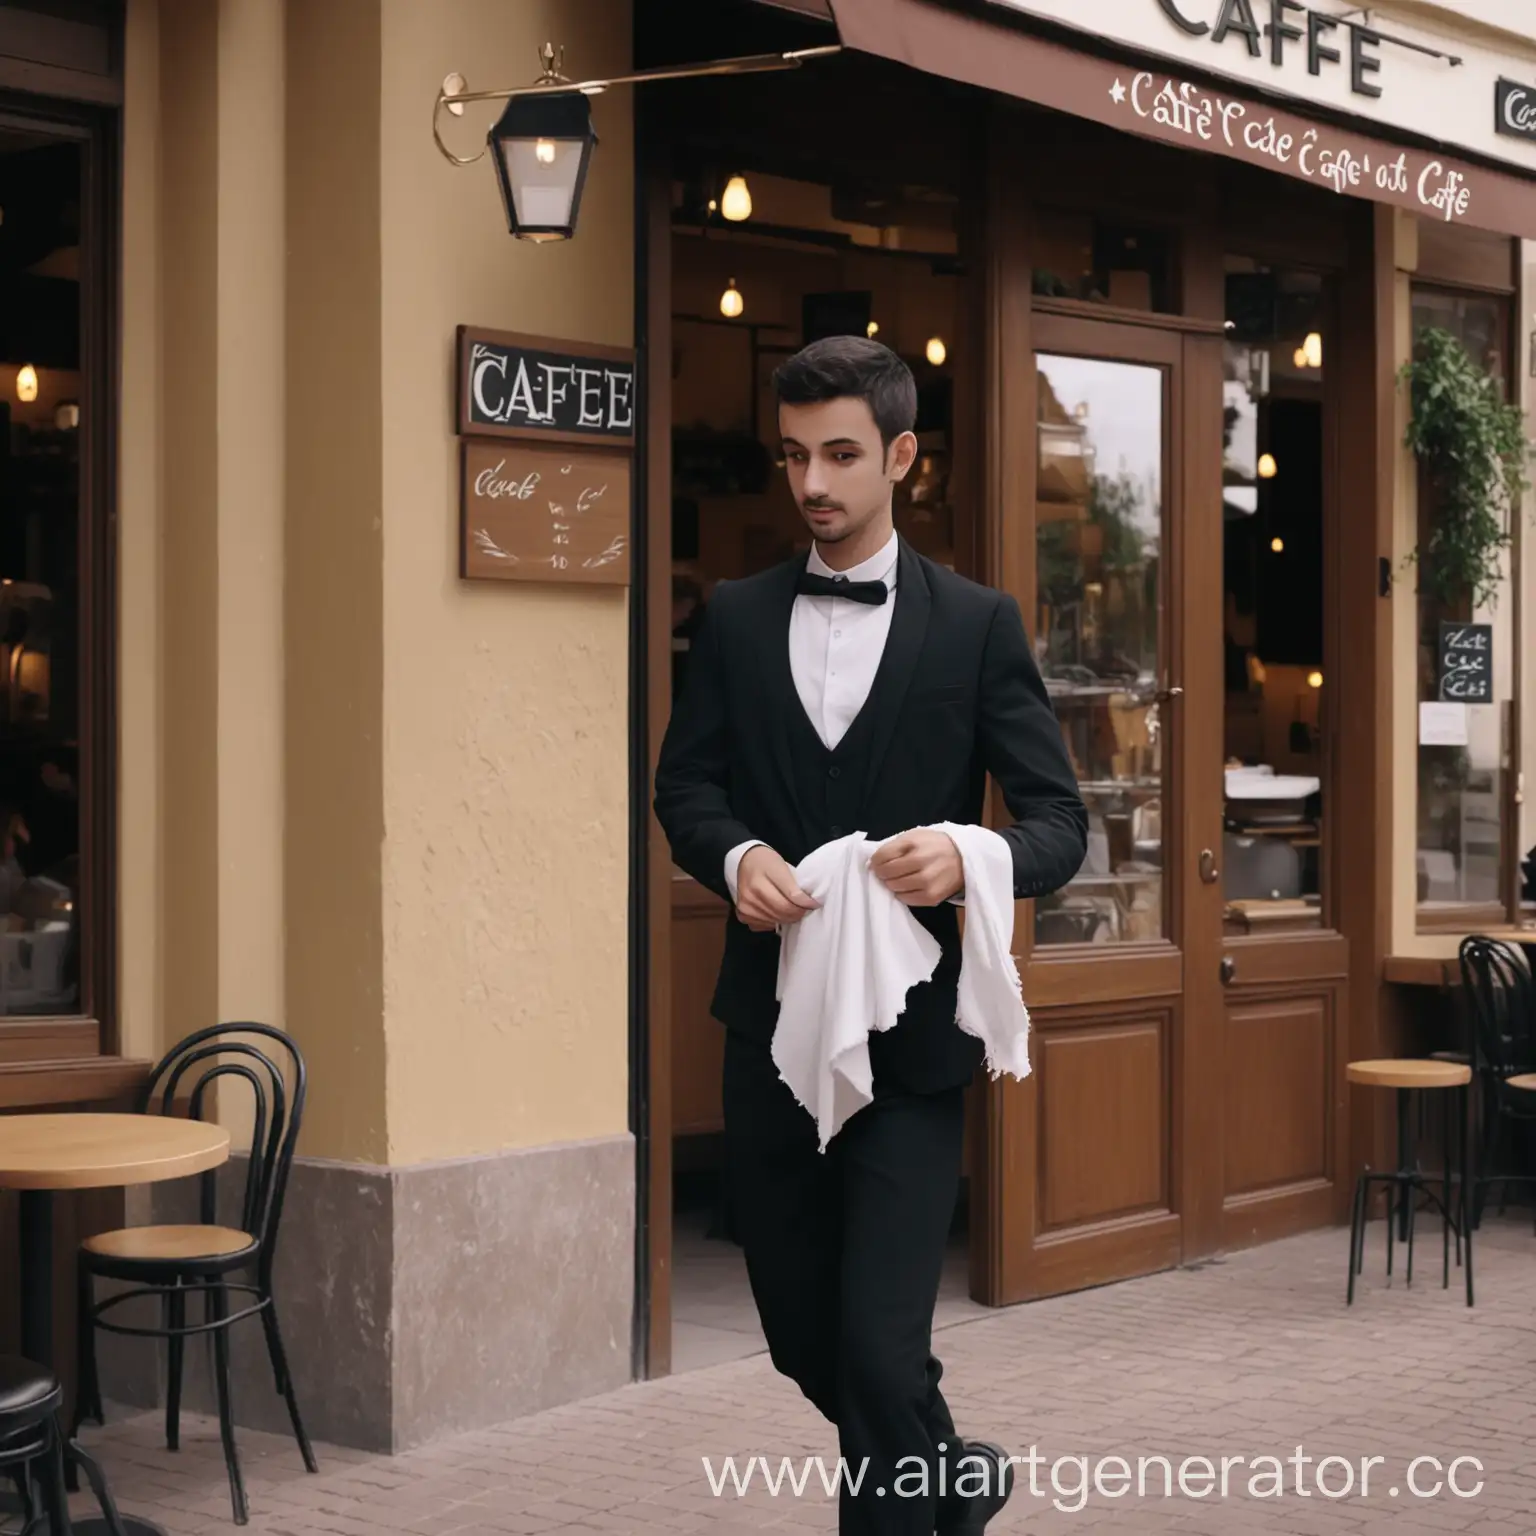 Waiter-Exiting-Cafe-with-Rag-in-Hand